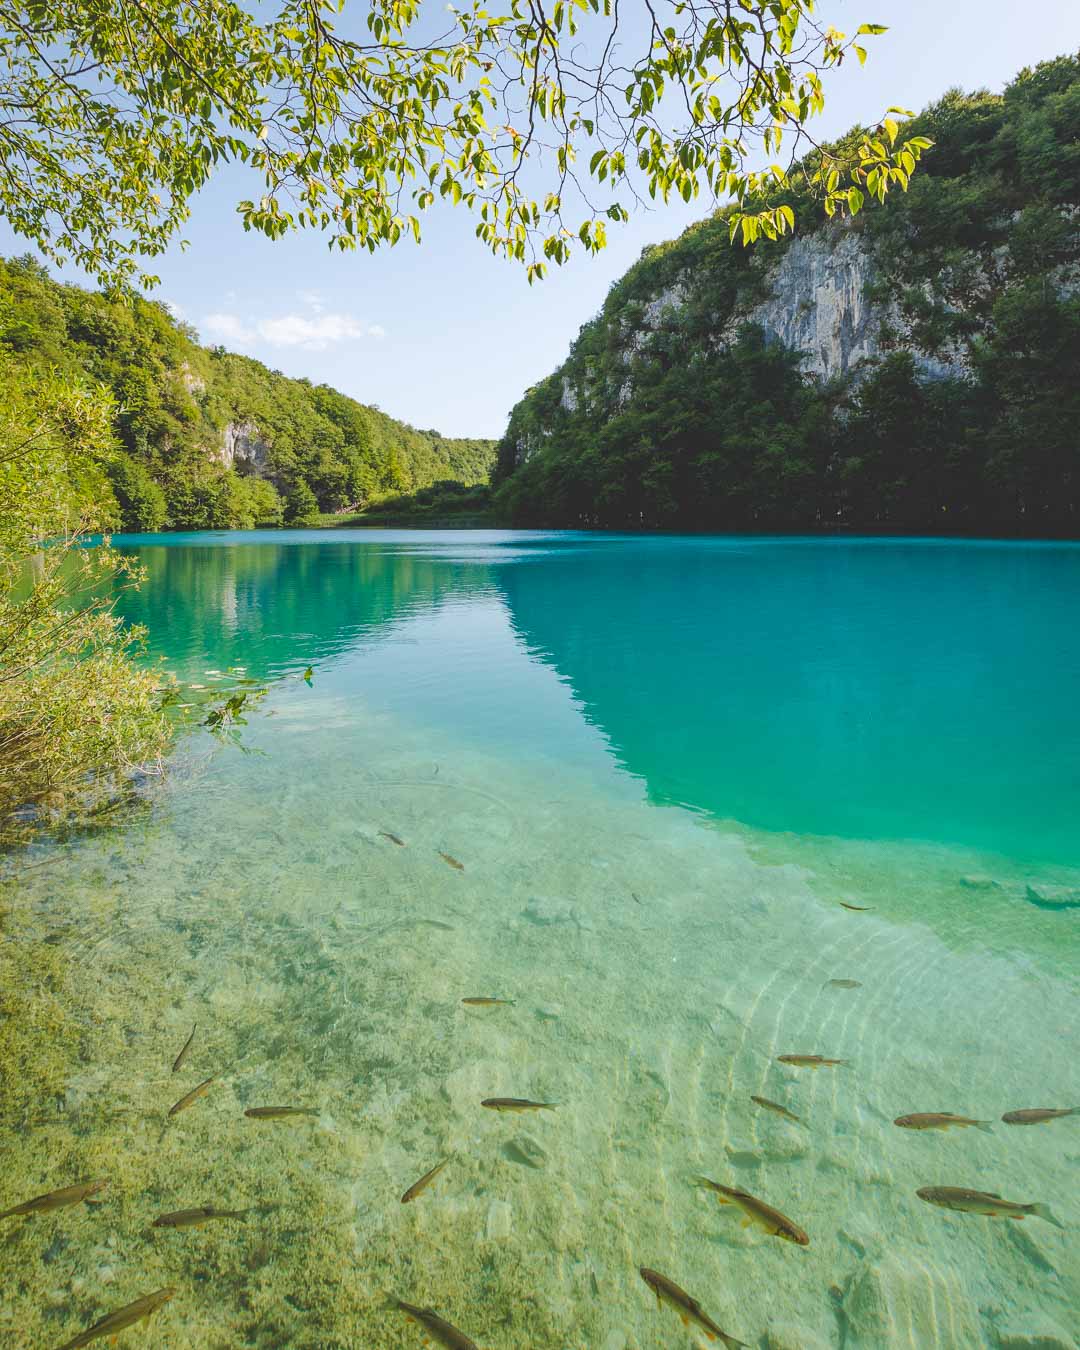 fishes and turquoise water in croatia